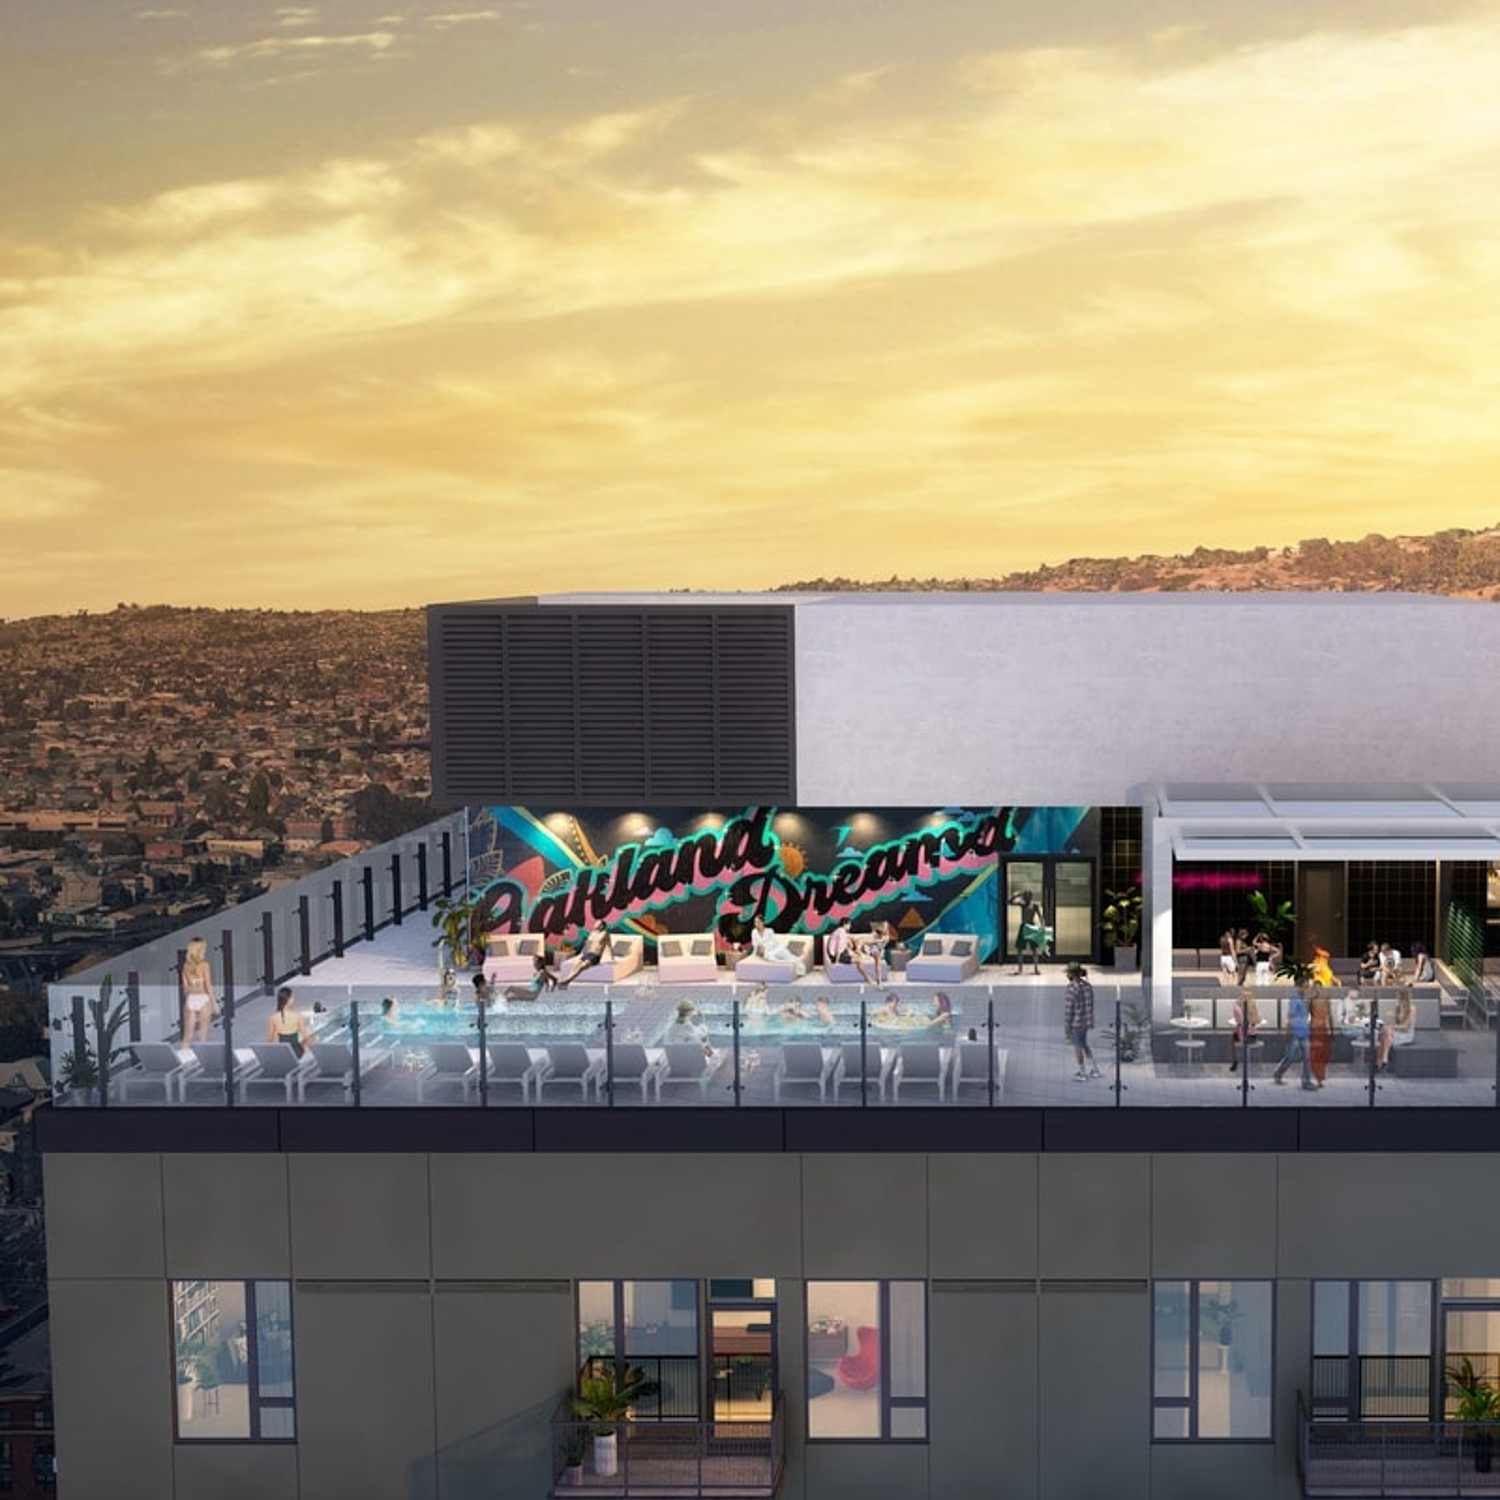 2015 Telegraph Avenue roof deck, rendering courtesy the X Company